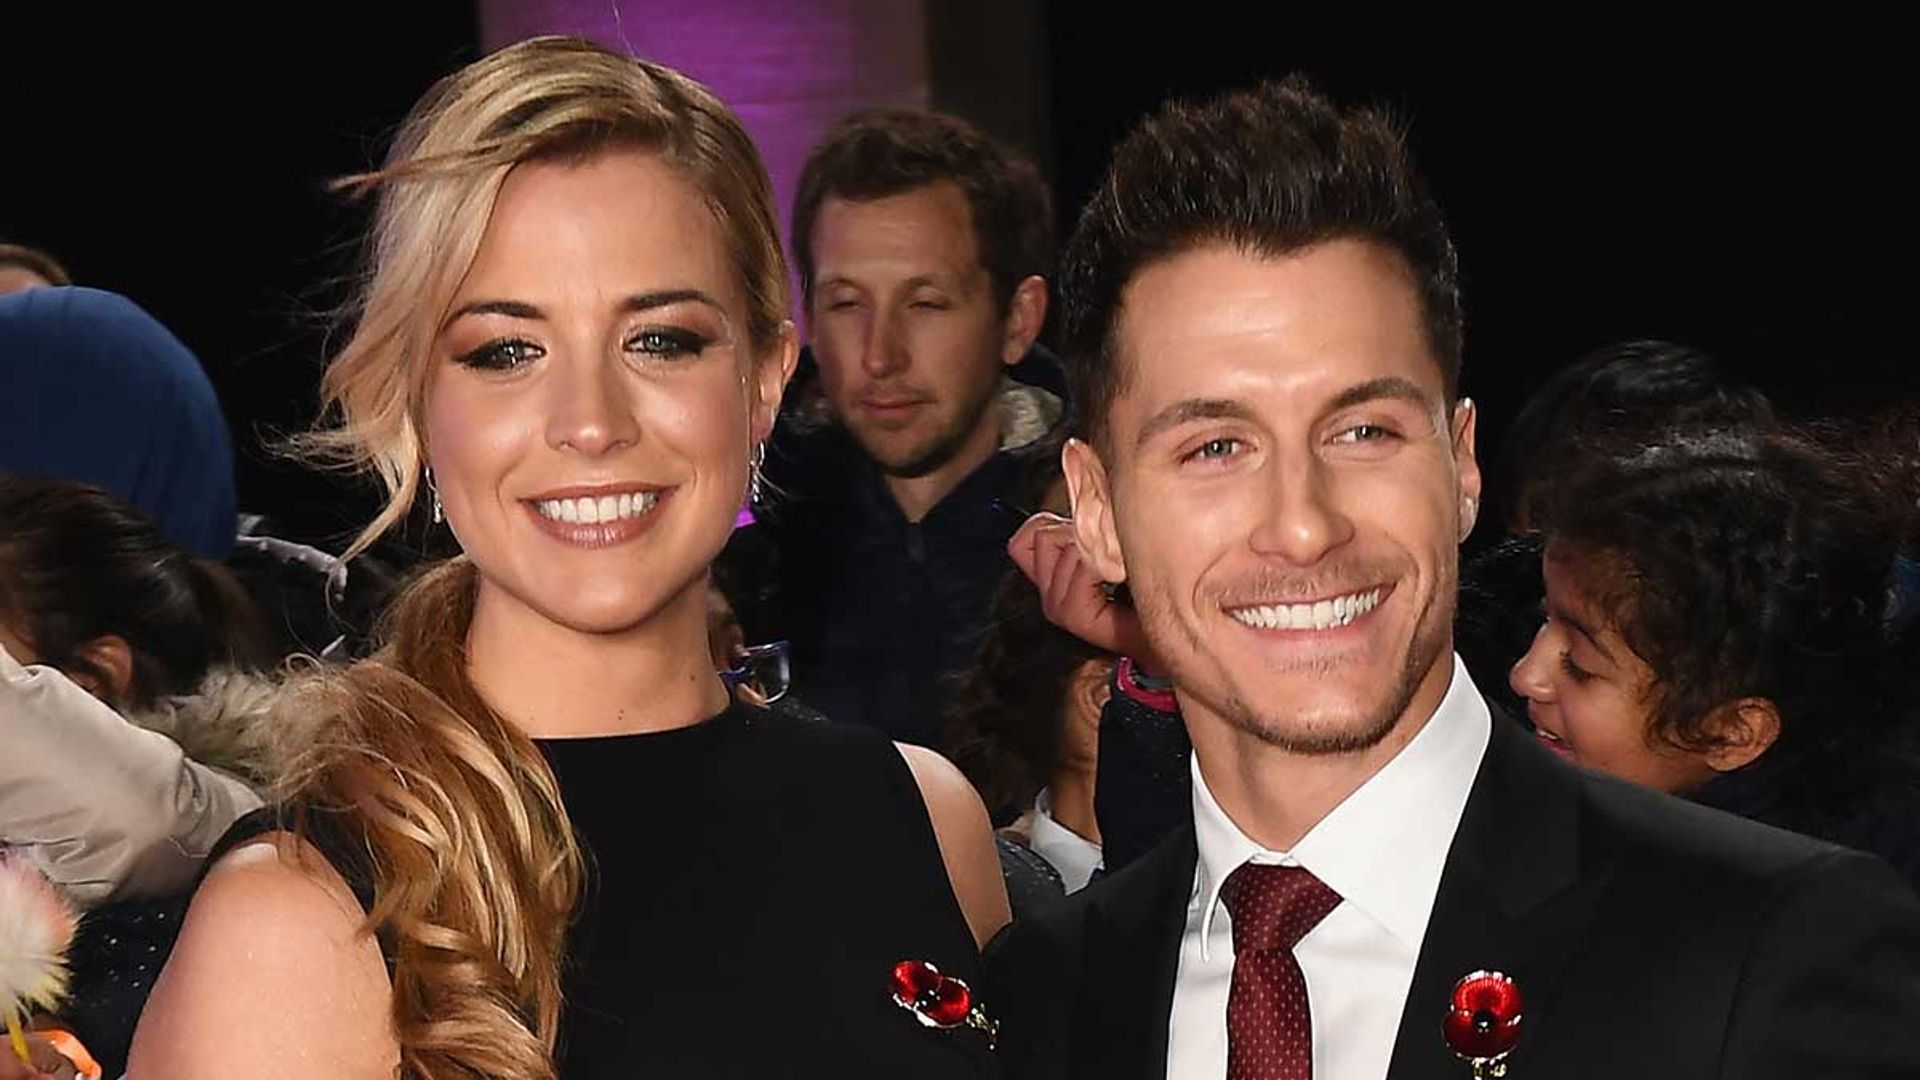 Gemma Atkinson and Strictly's Gorka Marquez expecting second baby thumbnail